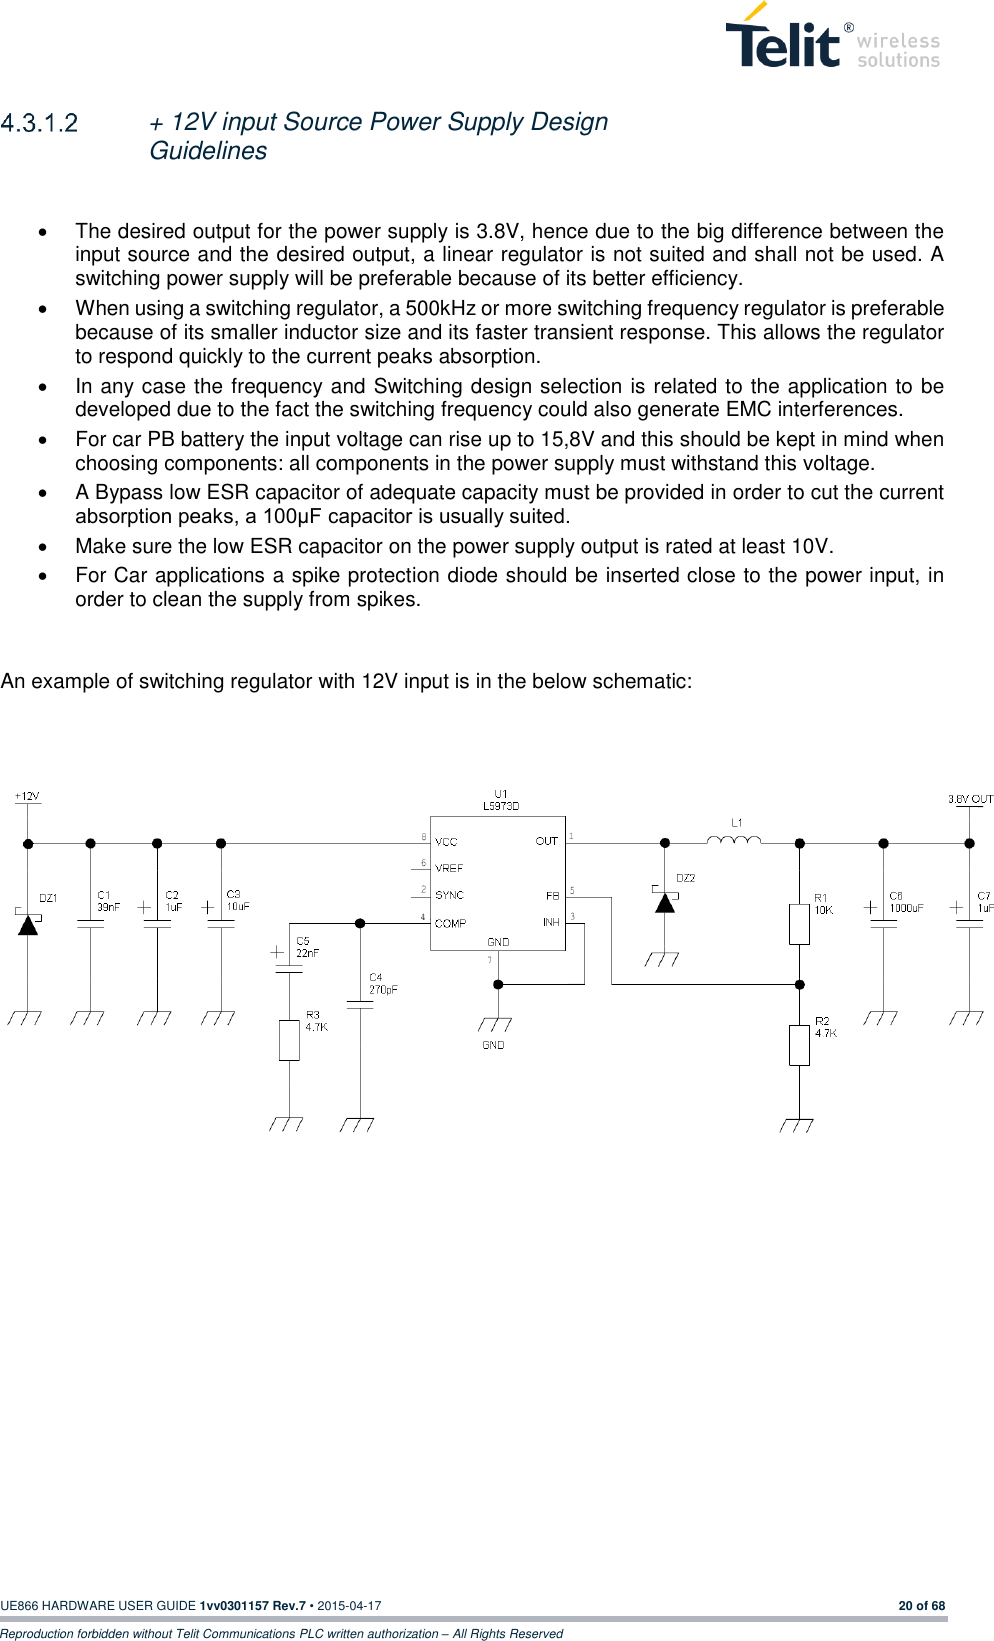  UE866 HARDWARE USER GUIDE 1vv0301157 Rev.7 • 2015-04-17 20 of 68 Reproduction forbidden without Telit Communications PLC written authorization – All Rights Reserved   + 12V input Source Power Supply Design Guidelines    The desired output for the power supply is 3.8V, hence due to the big difference between the input source and the desired output, a linear regulator is not suited and shall not be used. A switching power supply will be preferable because of its better efficiency.   When using a switching regulator, a 500kHz or more switching frequency regulator is preferable because of its smaller inductor size and its faster transient response. This allows the regulator to respond quickly to the current peaks absorption.    In any case the frequency and Switching design selection is related to the application to be developed due to the fact the switching frequency could also generate EMC interferences.   For car PB battery the input voltage can rise up to 15,8V and this should be kept in mind when choosing components: all components in the power supply must withstand this voltage.   A Bypass low ESR capacitor of adequate capacity must be provided in order to cut the current absorption peaks, a 100μF capacitor is usually suited.   Make sure the low ESR capacitor on the power supply output is rated at least 10V.   For Car applications a spike protection diode should be inserted close to the power input, in order to clean the supply from spikes.    An example of switching regulator with 12V input is in the below schematic:        